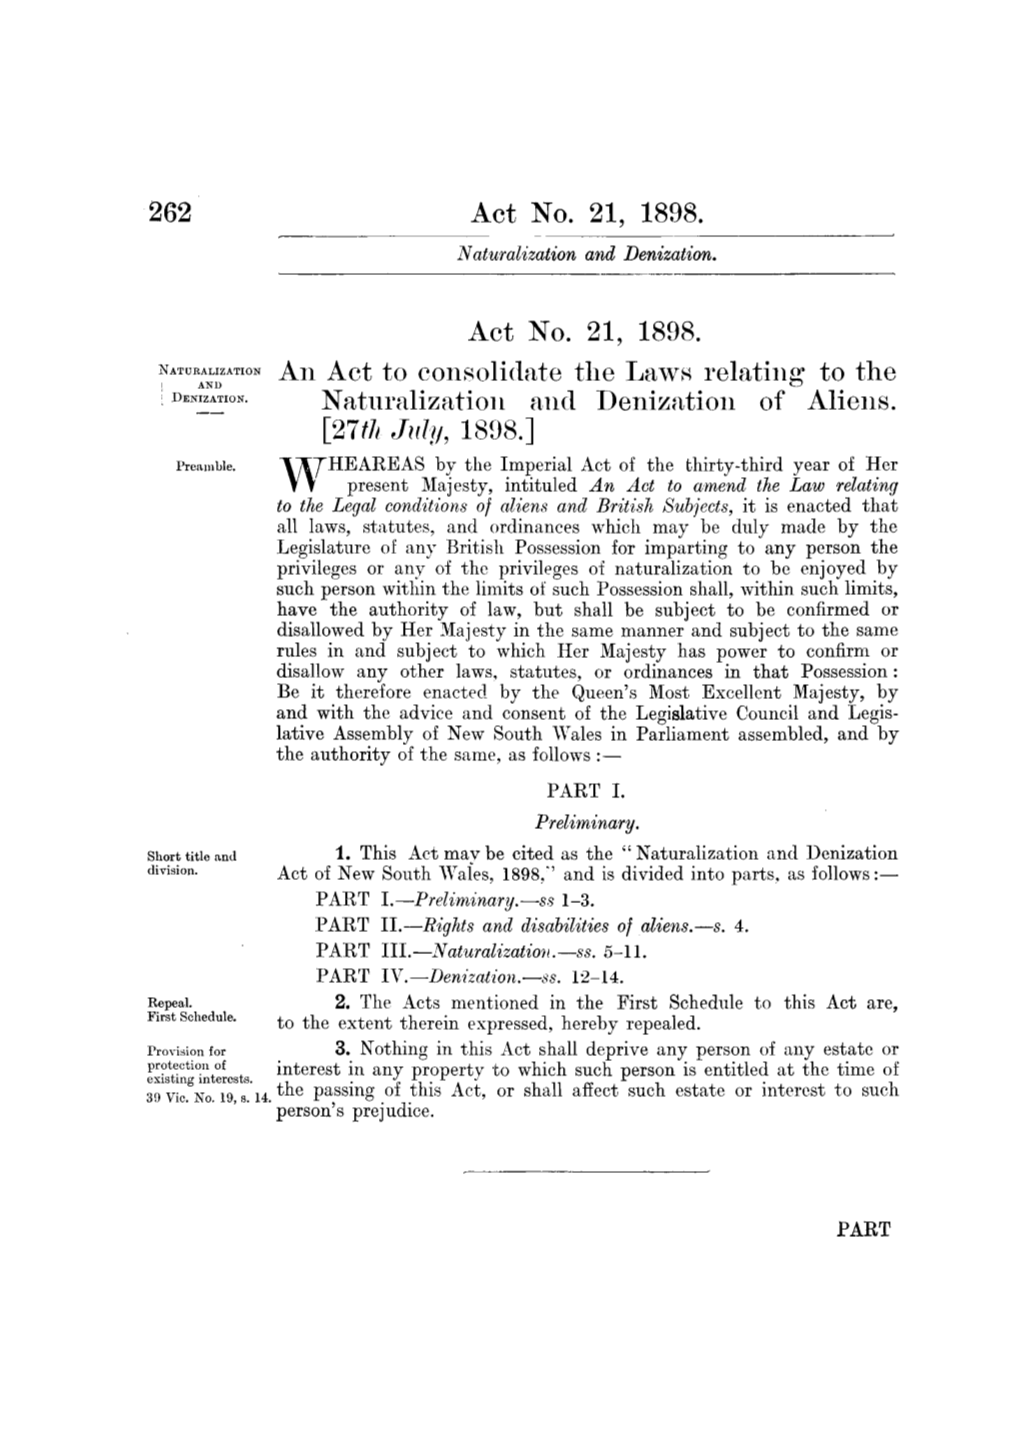 Act No. 21, 1898. an Act to Consolidate the Laws Relating to the Naturalization and Denization of Aliens. [27Th July, 1898.]